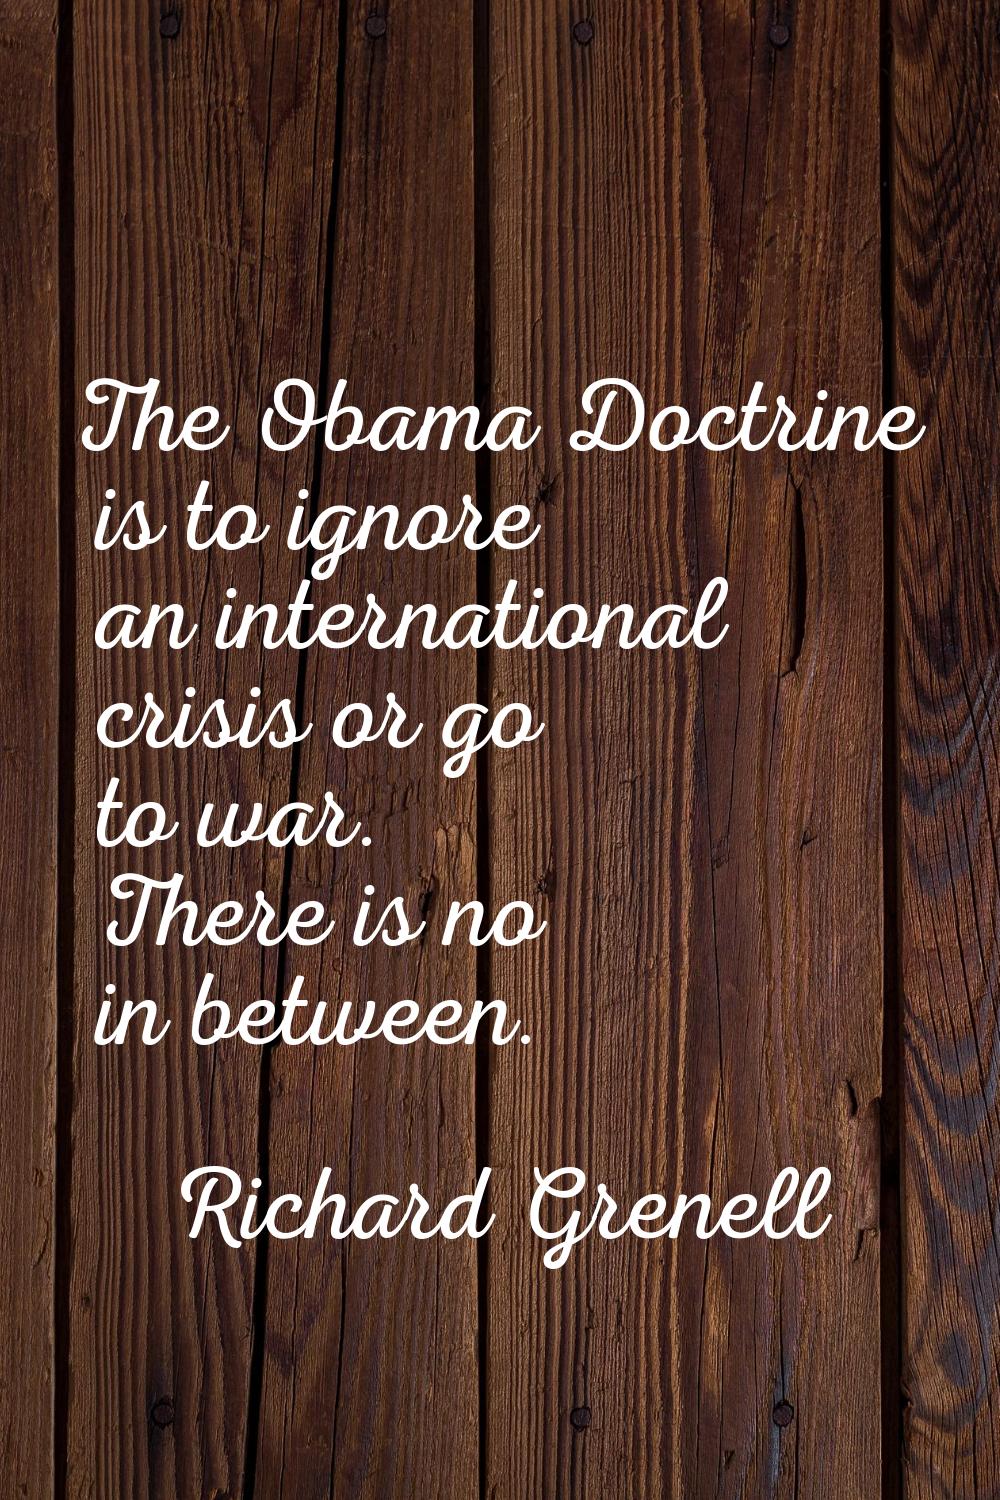 The Obama Doctrine is to ignore an international crisis or go to war. There is no in between.